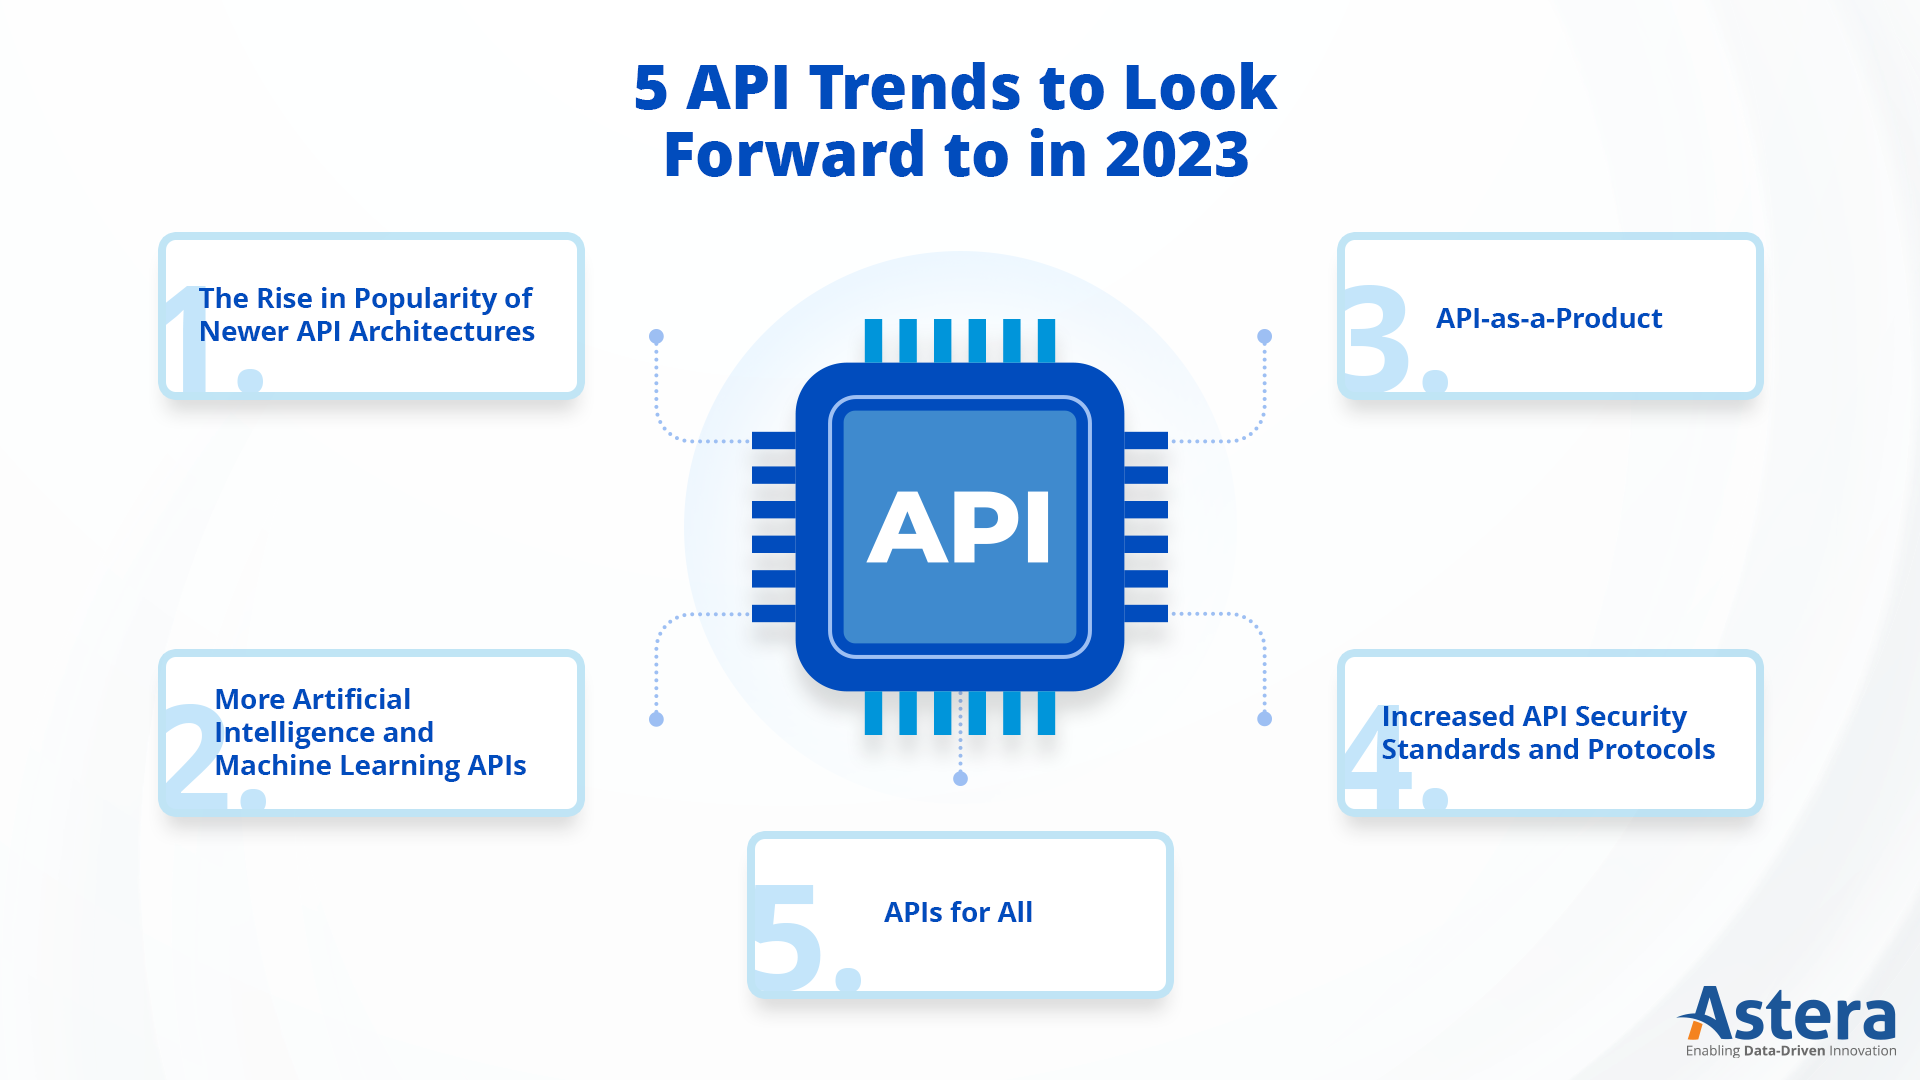 5 API Trends to Look Forward to in 2023